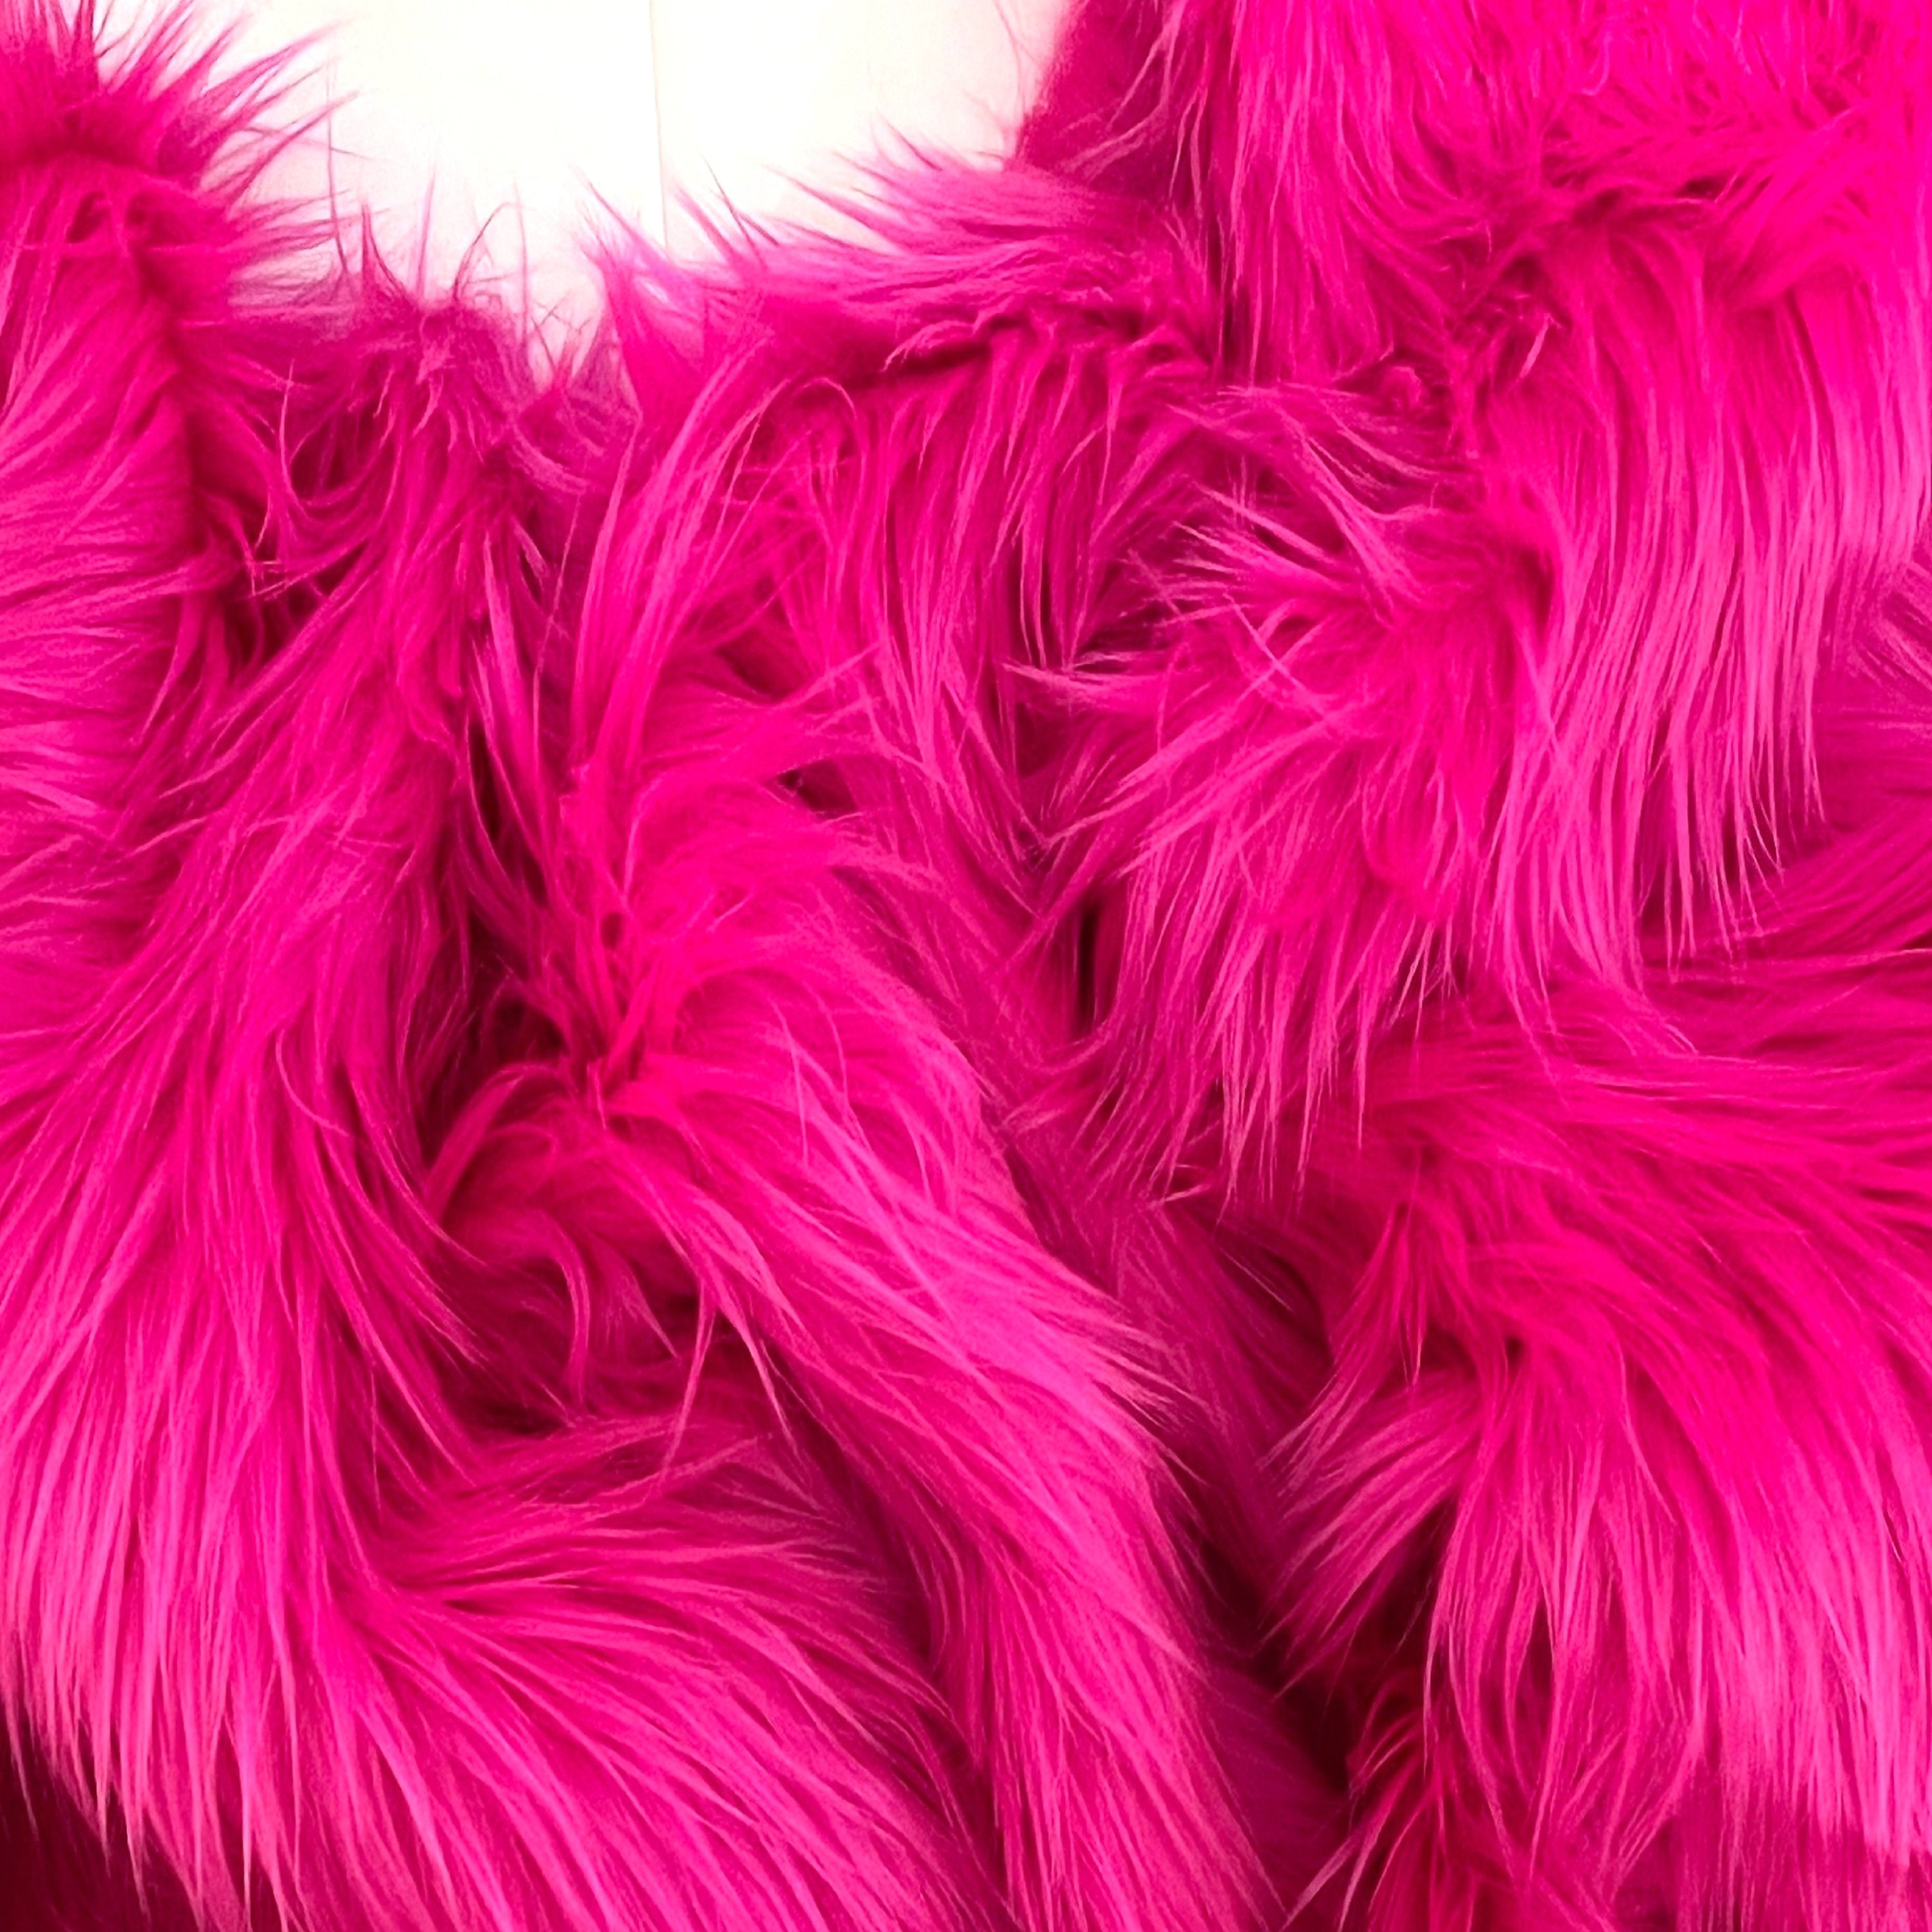 Bianna BRIGHT HOT PINK Long Pile Faux Fur Fabric, High Quality Shag Shaggy  Material in Pieces, Squares for Crafts, Fursuit 